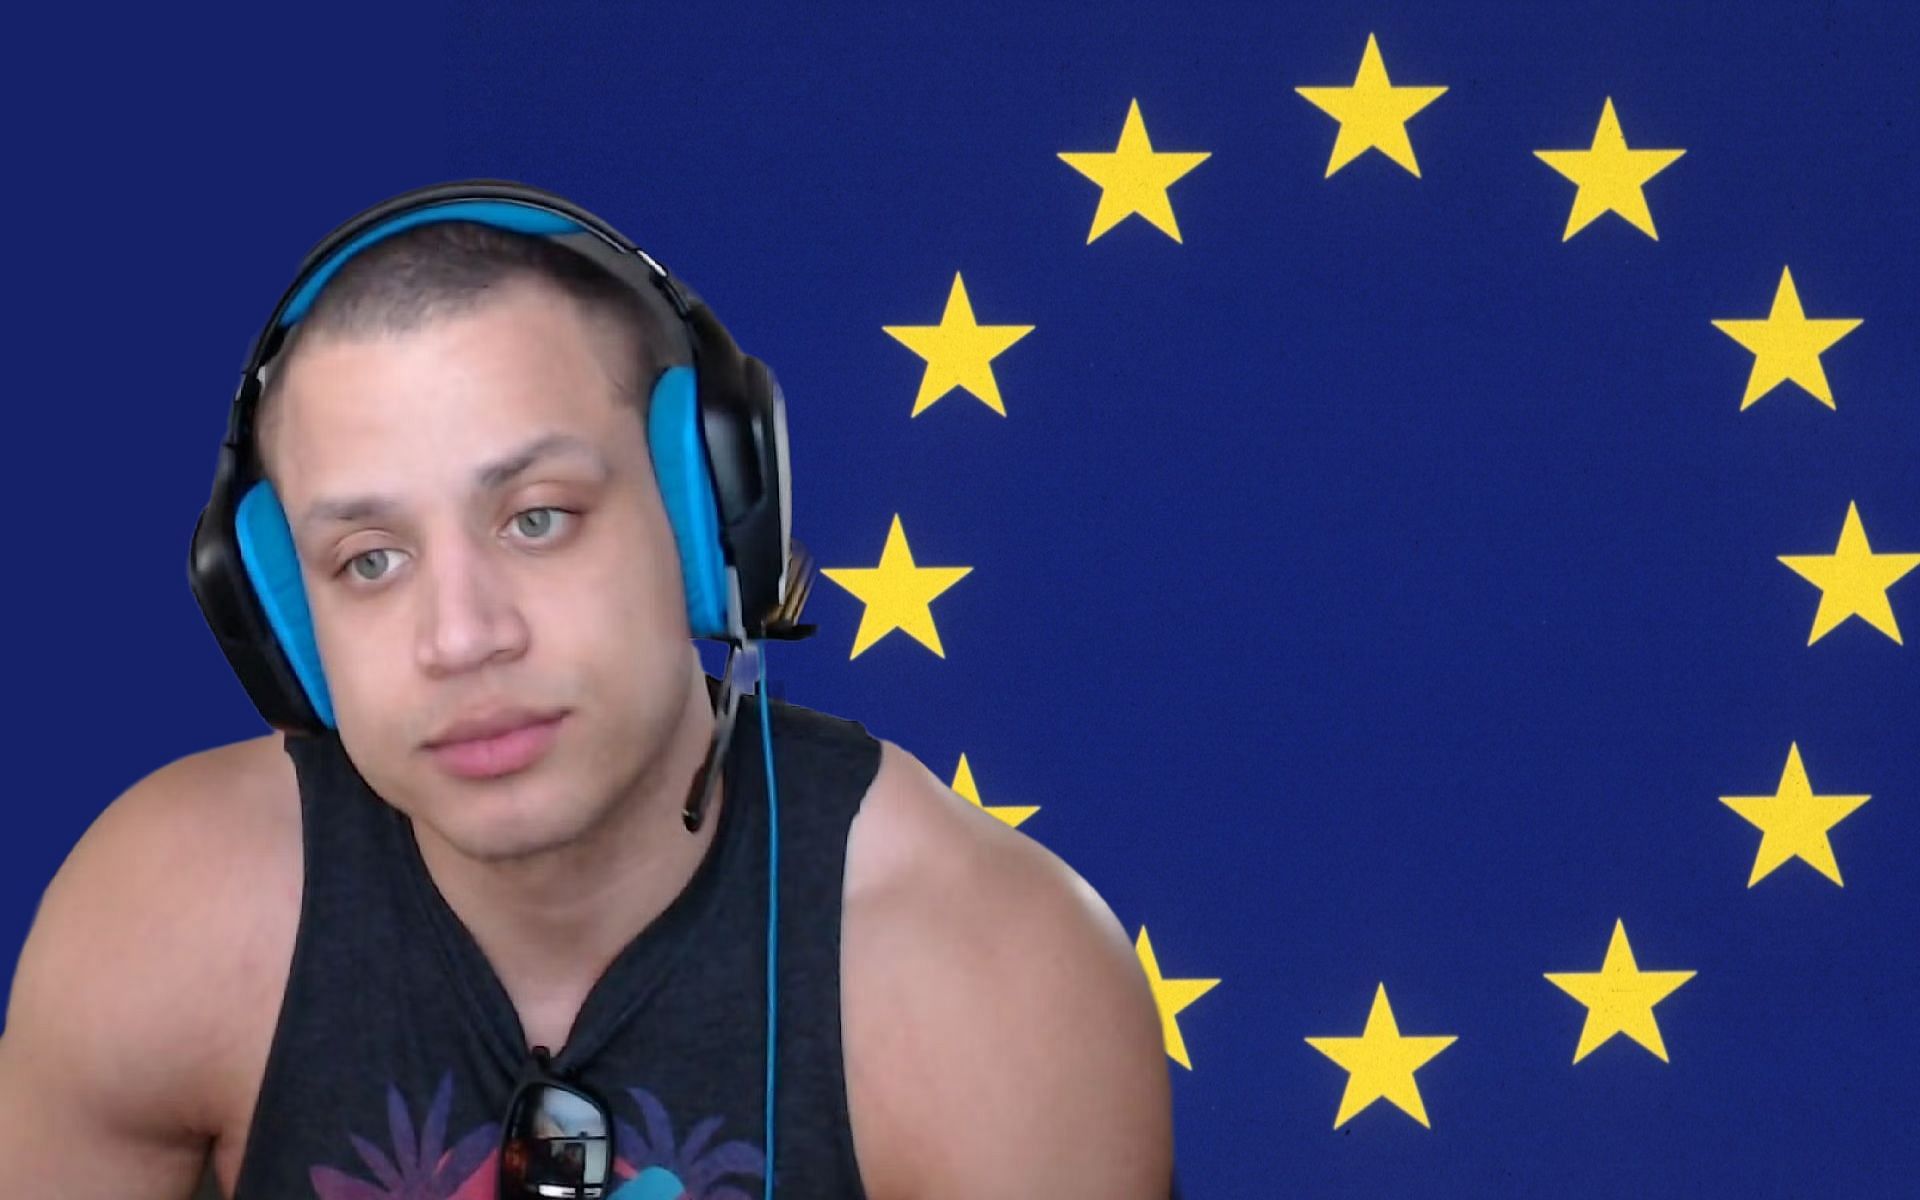 Tyler1 talks about his upcoming League of Legends challenge in the EU (Image via Sportskeeda)